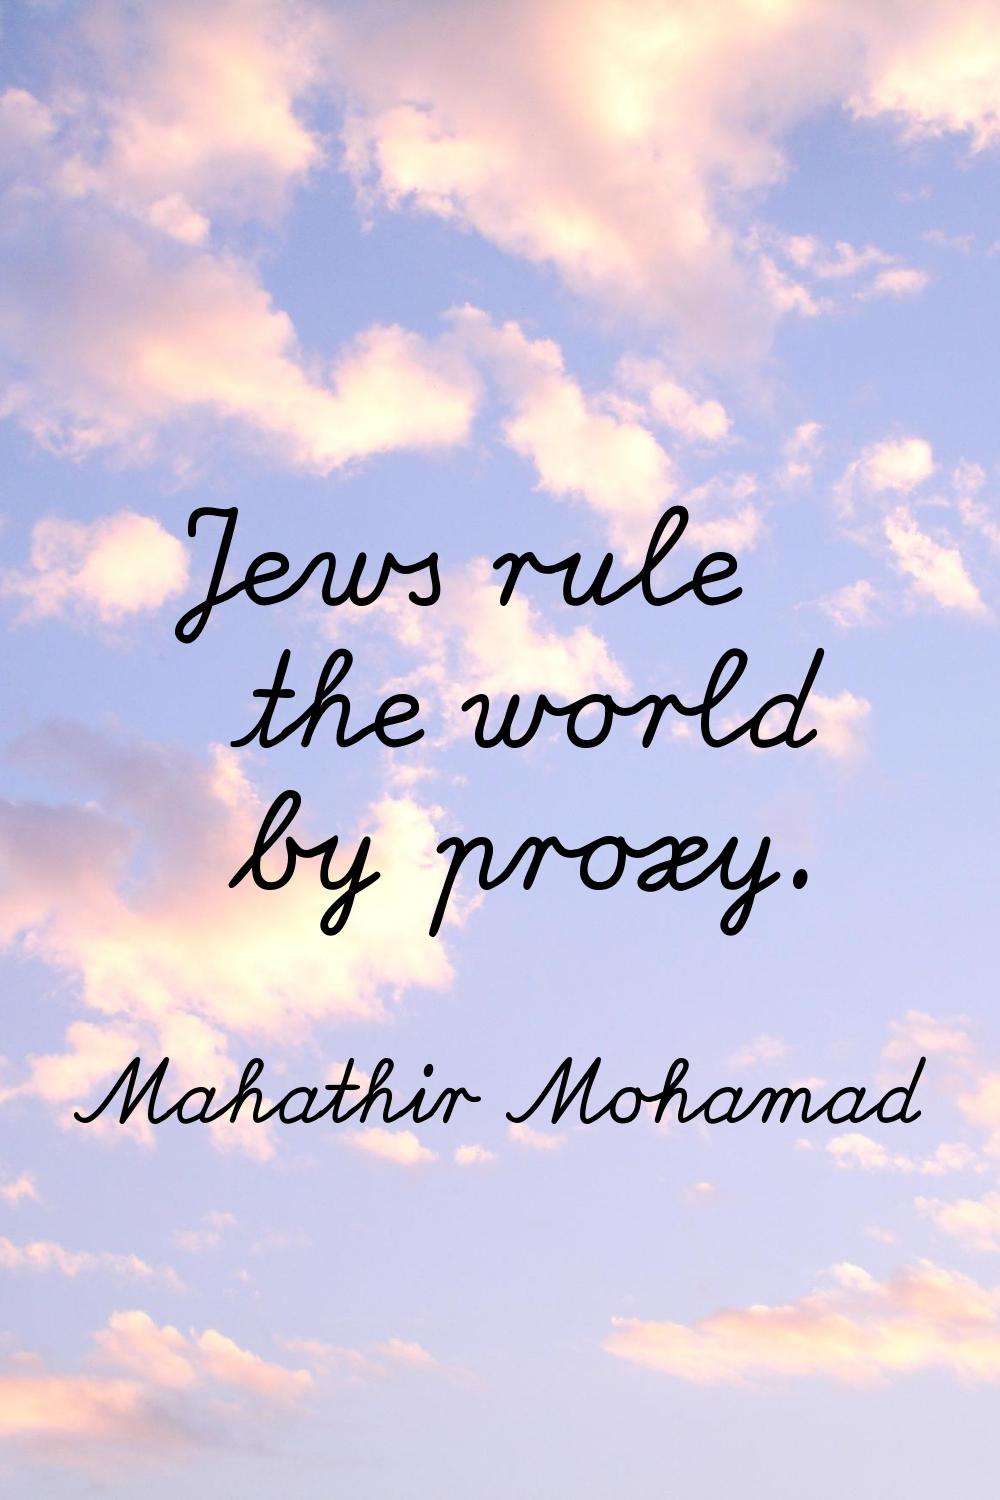 Jews rule the world by proxy.